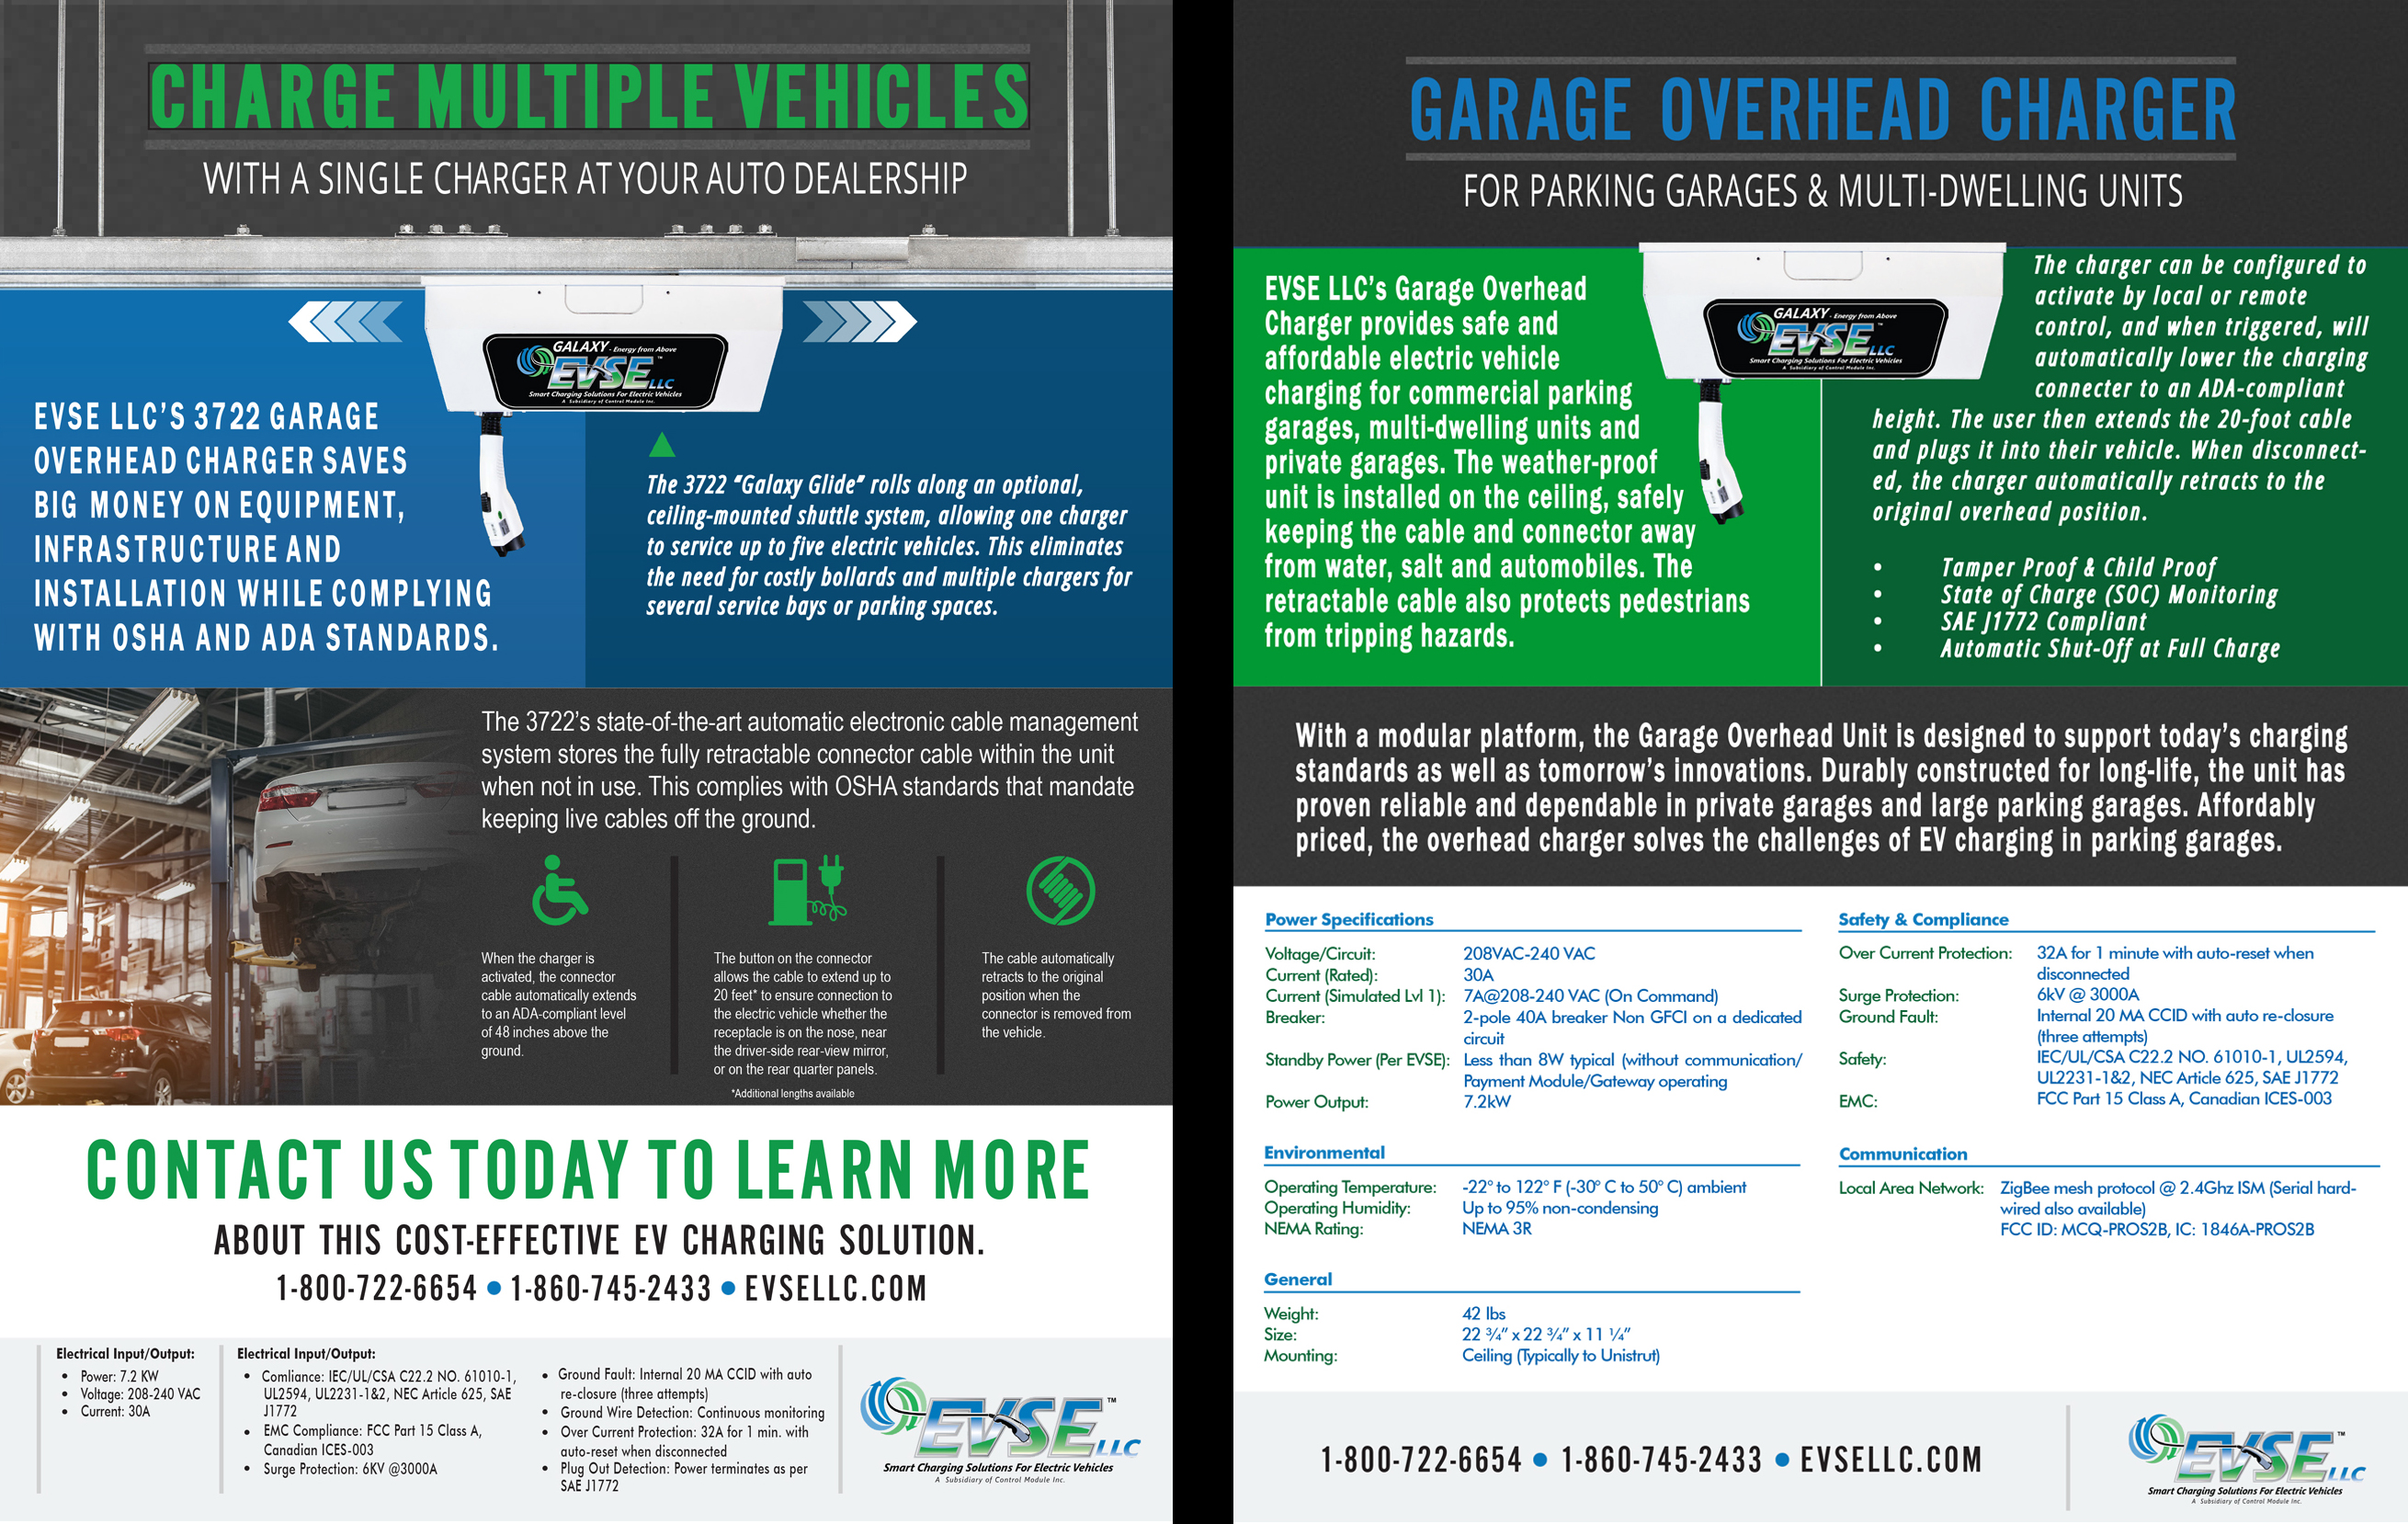 Control Module/EVSE Promotional Material